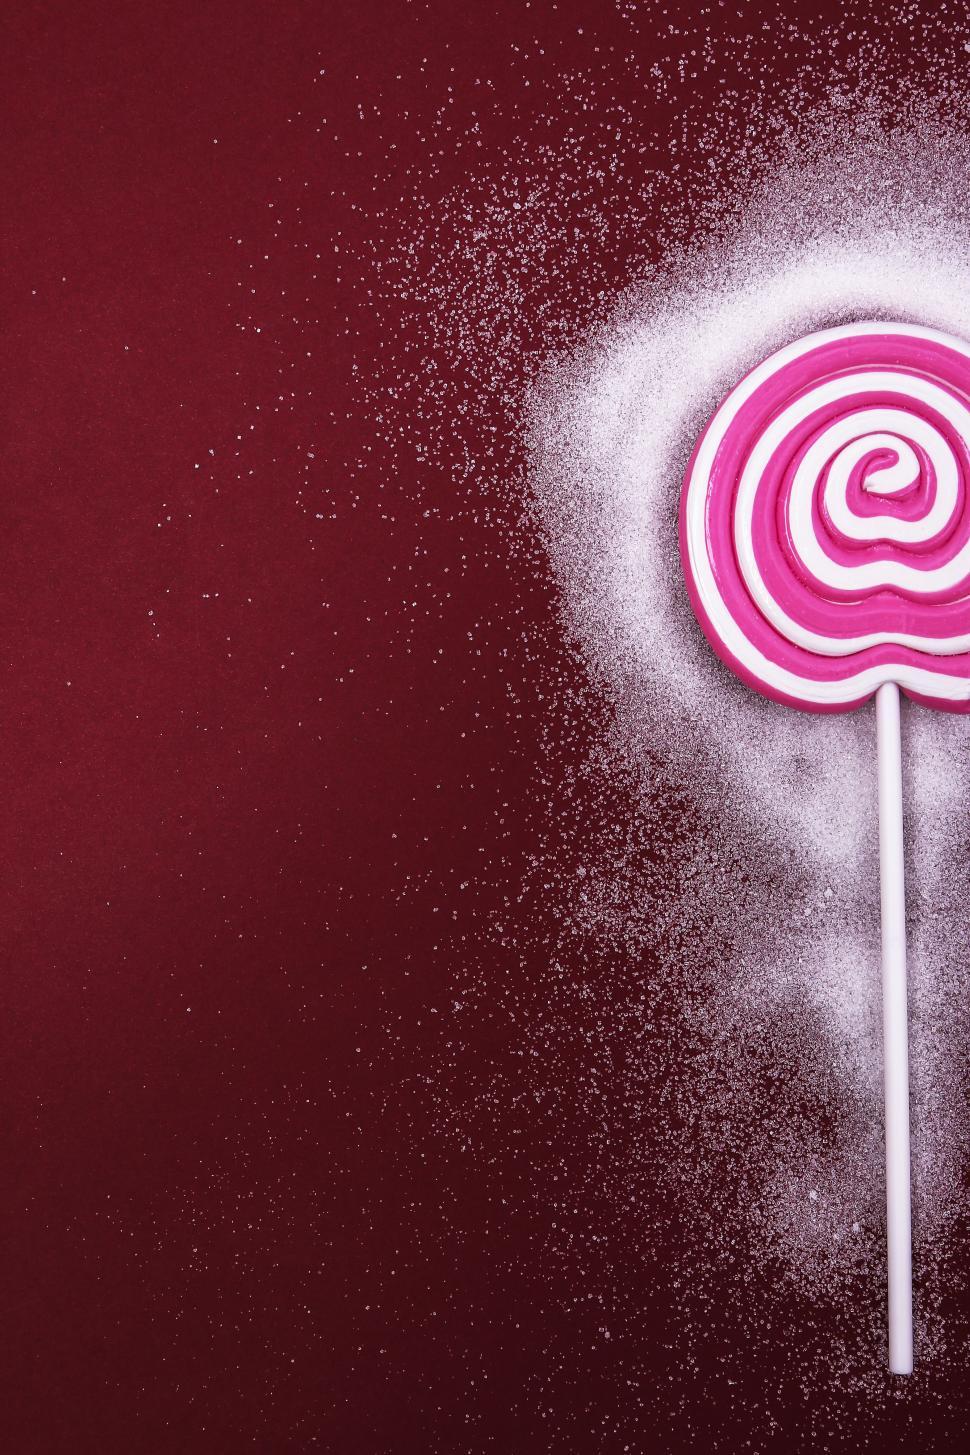 Free Image of Delicious lollipop with sugar halo glow 